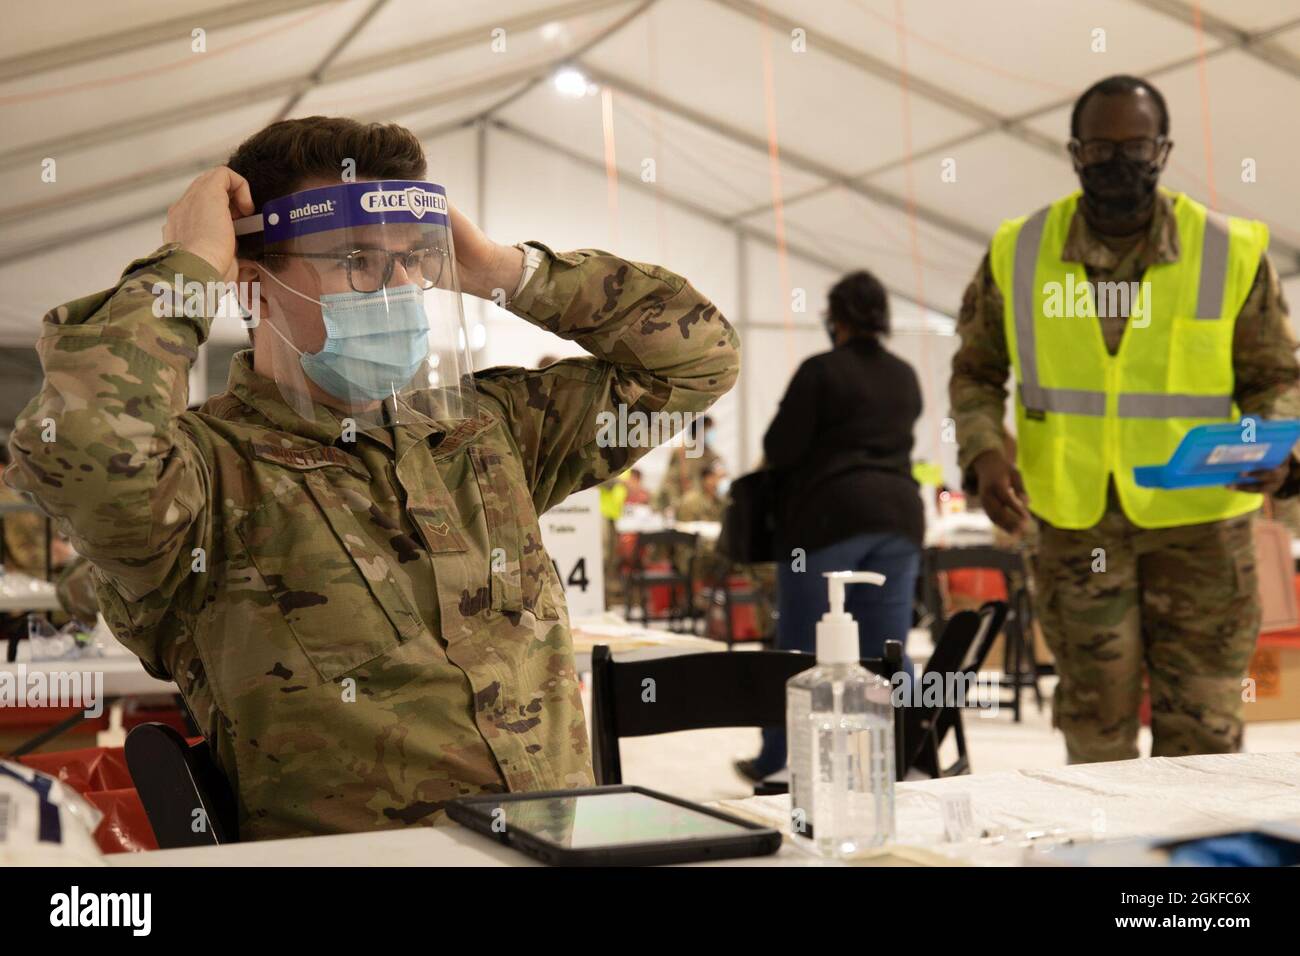 U.S. Air Force Airman 1st Class Garrett Polityka, a Reading, Pennsylvania, native, and a network technician assigned to the 335th Air Expeditionary Group, dons his face shield at the federally-run pilot Community Vaccination Center in Greenbelt, Maryland, April 8, 2021. U.S. Northern Command, through U.S. Army North, remains committed to providing continued, flexible Department of Defense support to the Federal Emergency Management Agency as part of the whole-of-government response to COVID-19. Stock Photo